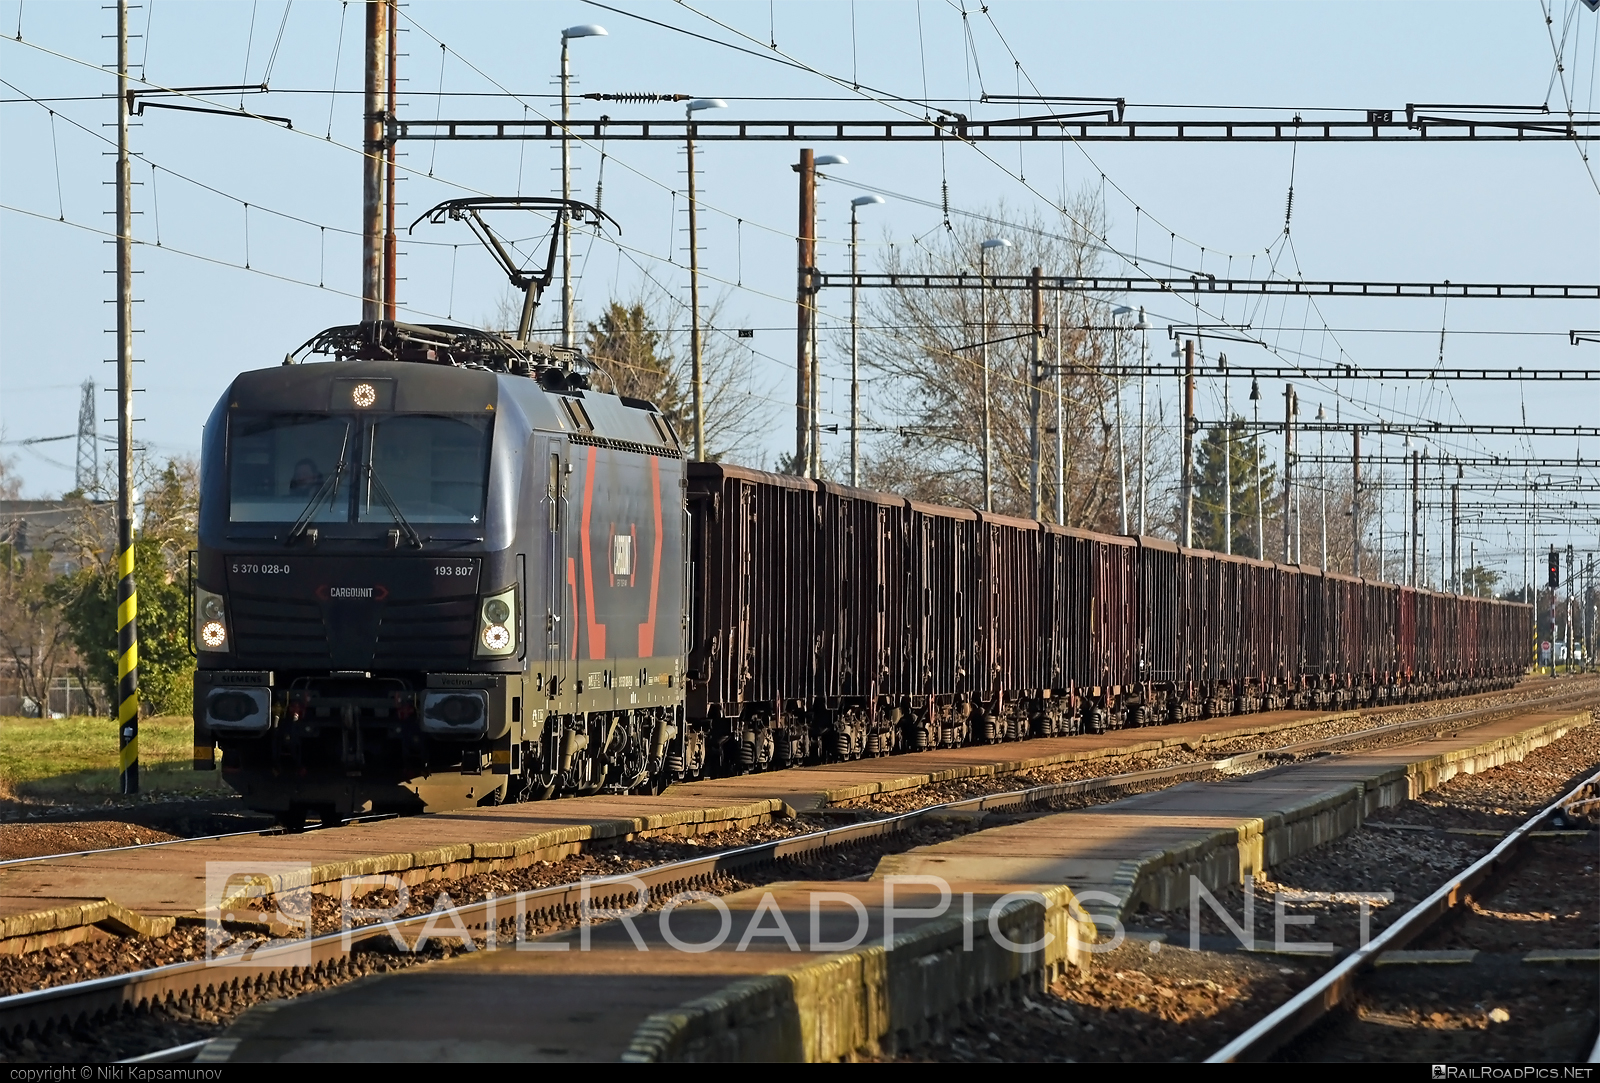 Siemens Vectron MS - 5 370 028-0 operated by LOKORAIL, a.s. #IndustrialDivision #cargounit #lokorail #lrl #openwagon #siemens #siemensVectron #siemensVectronMS #vectron #vectronMS